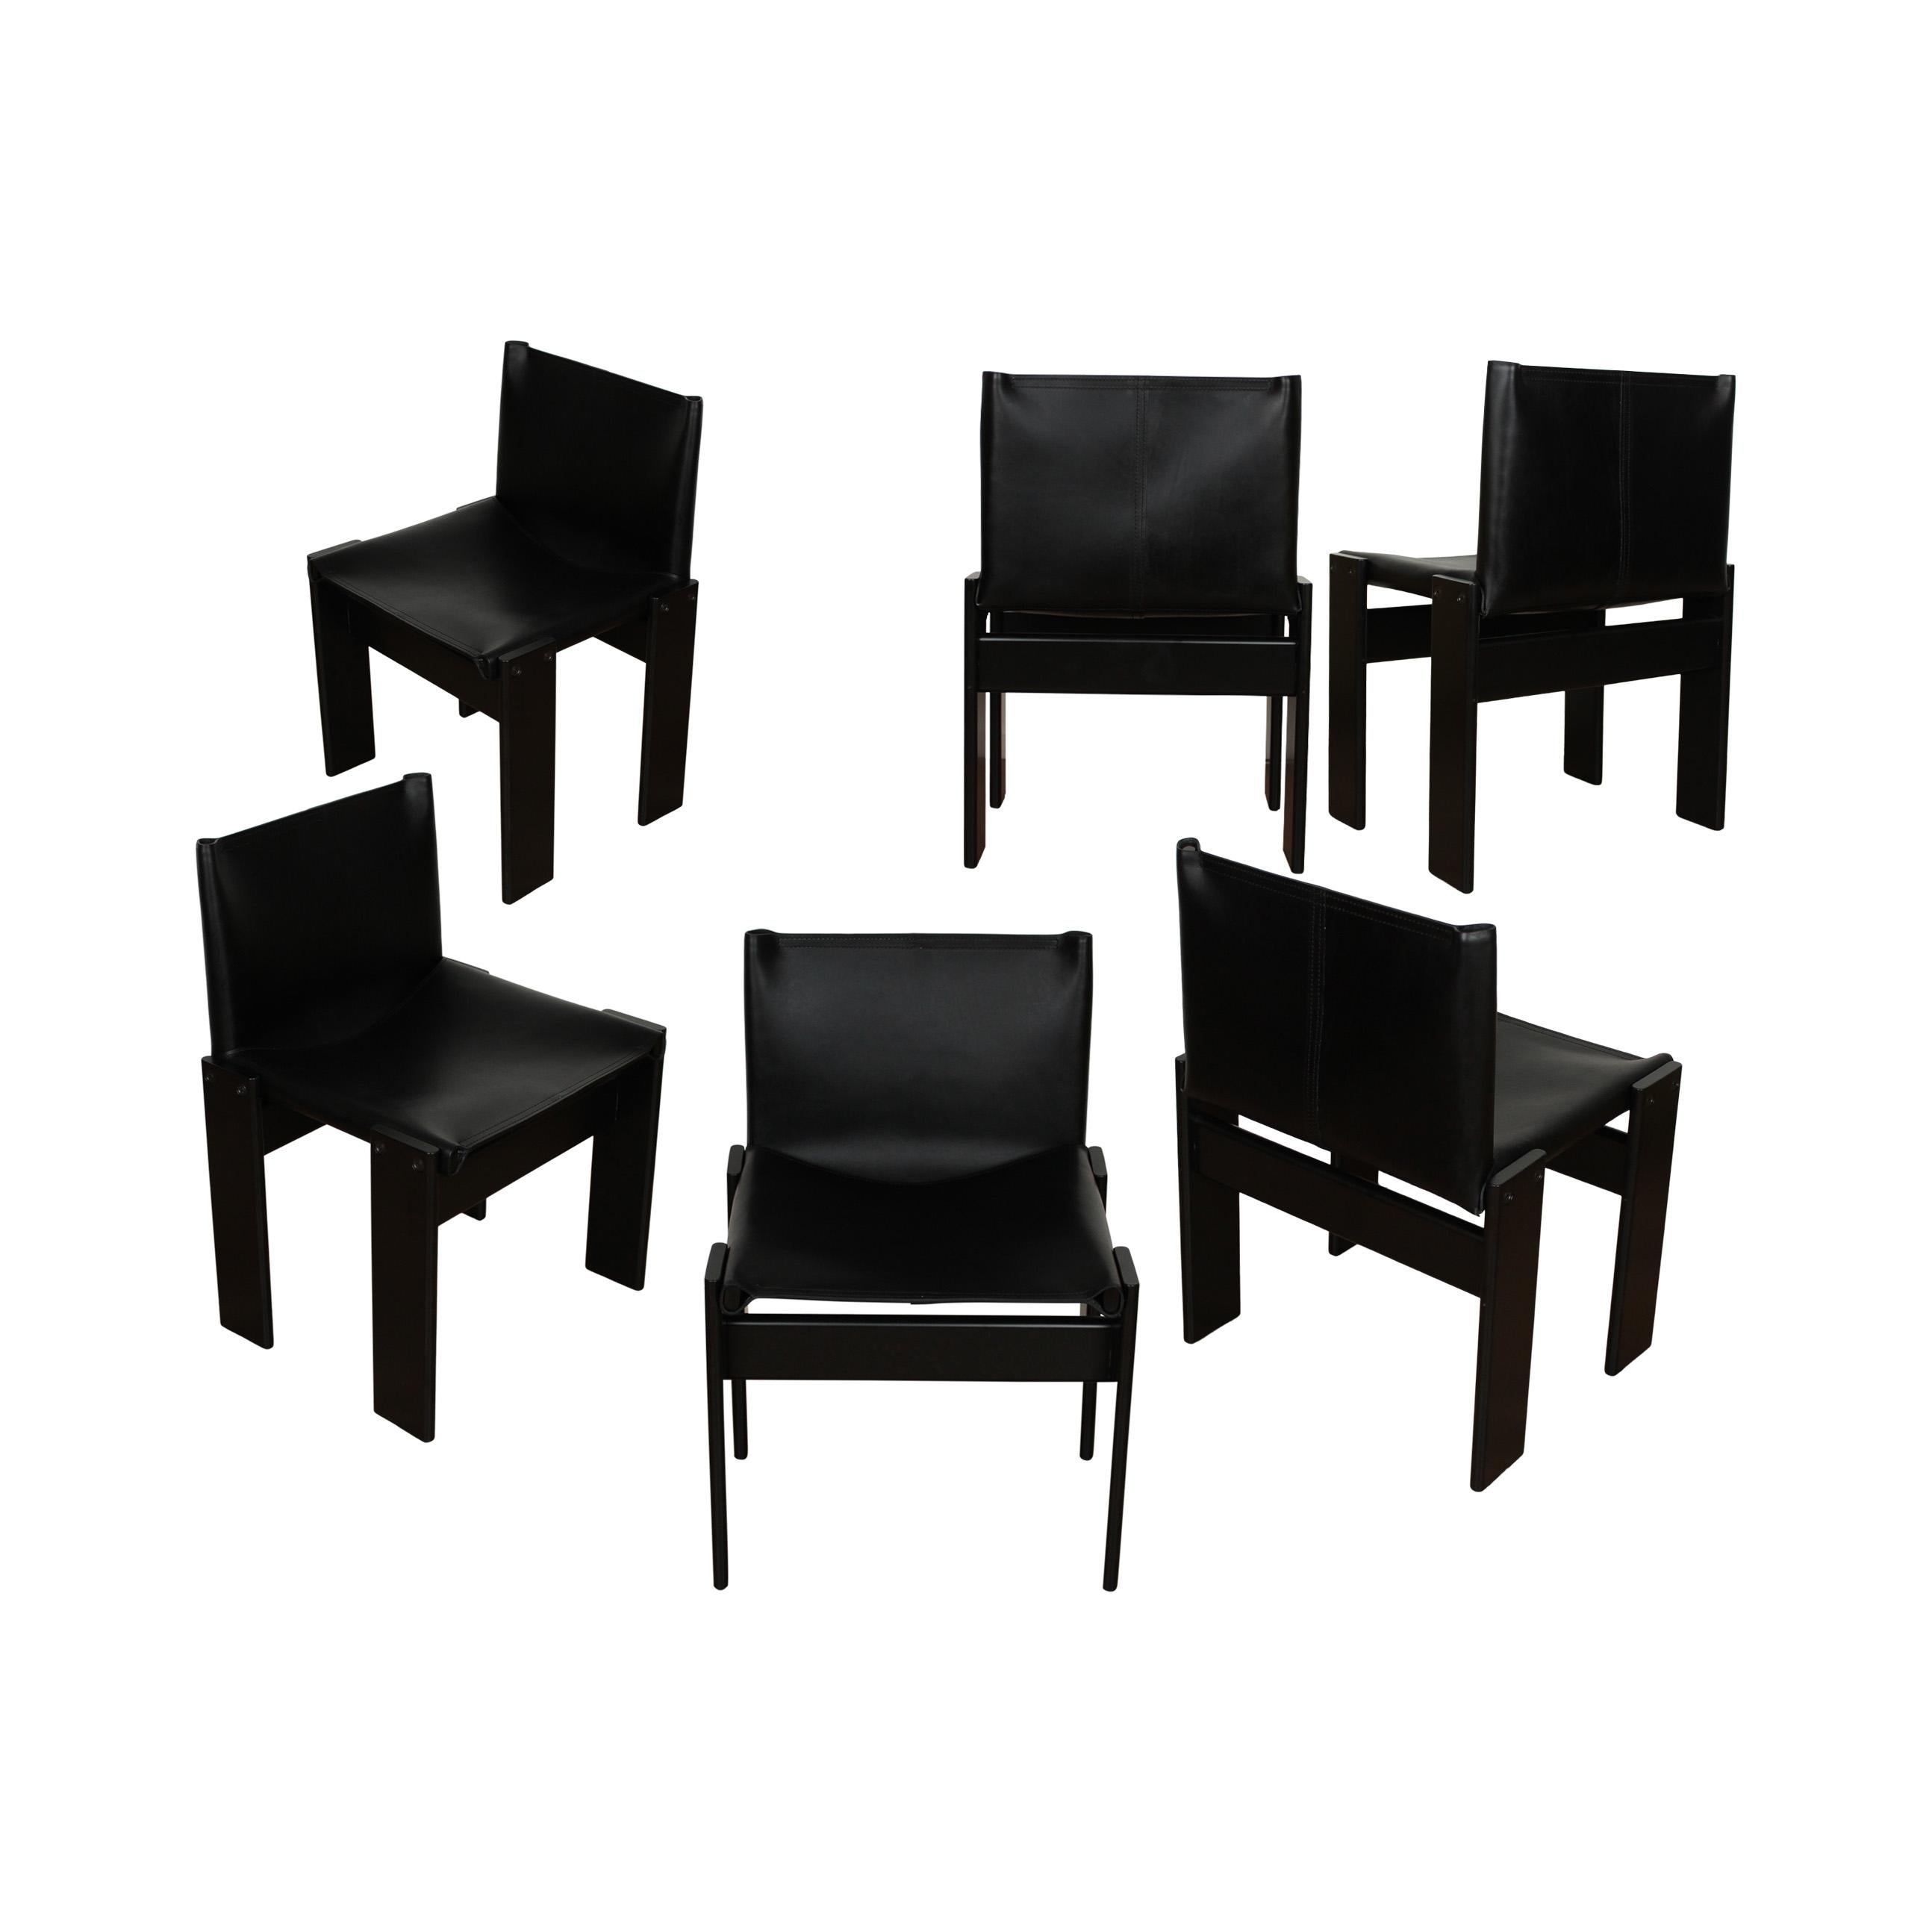 Set of six “Monk” dining chairs designed by Afra and Tobia Scarpa for Molteni in 1973.
Made of black leather and black lacquered beech wood.
Fully restored in Italy.

Interesting is the ‘flat’ shape of this chair where the designer has chosen to